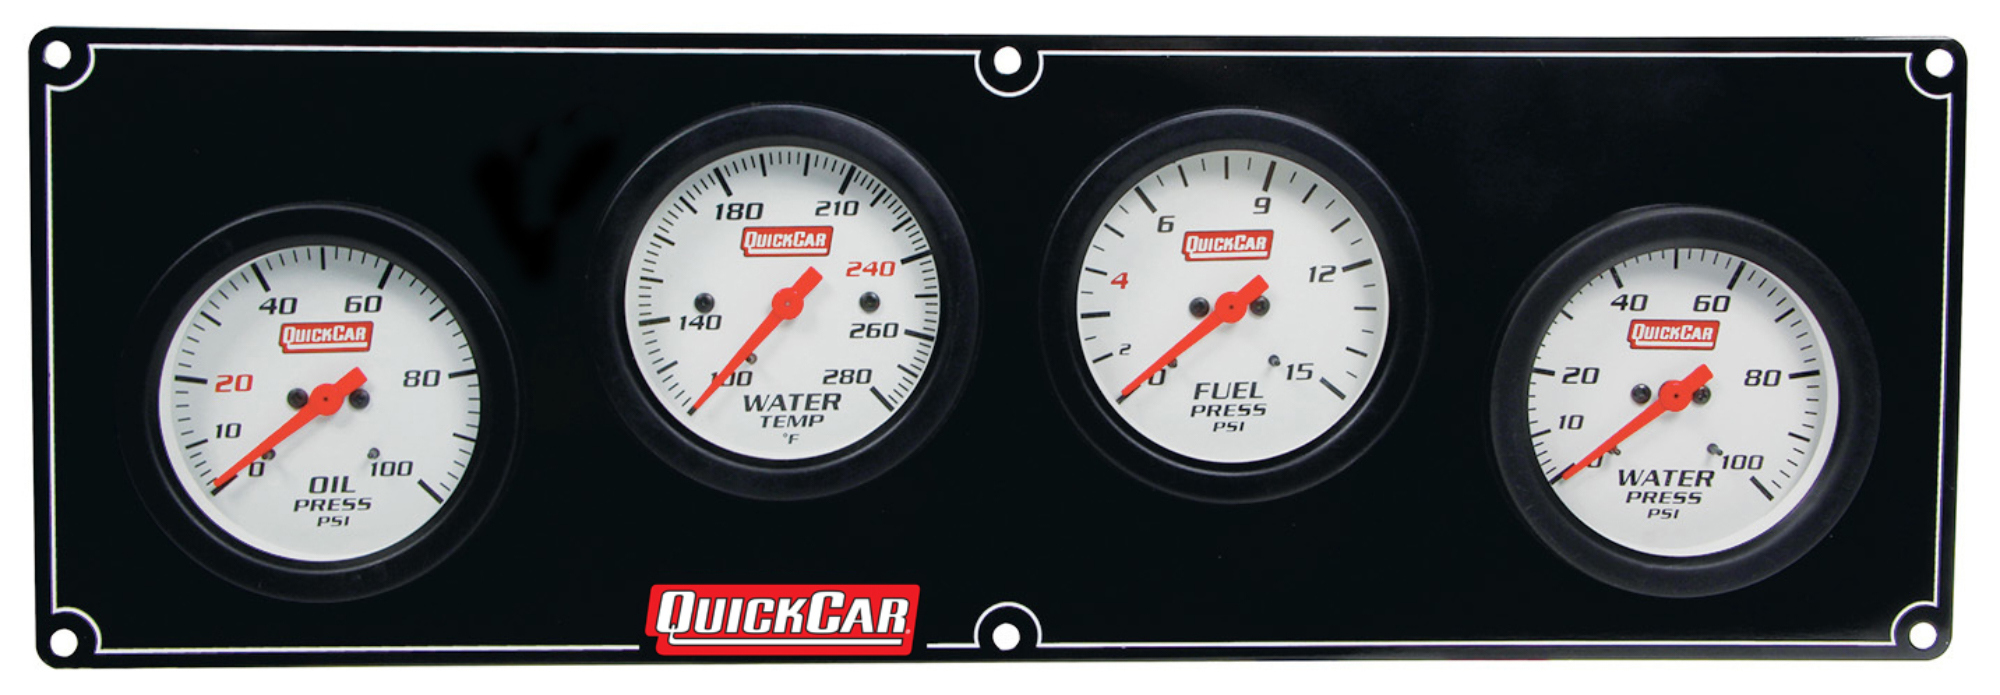 QuickCar 61-7026 - Gauge Panel Assembly, Extreme, Oil Pressure / Water Temperature / Fuel Pressure / Water Pressure, White Face, Kit